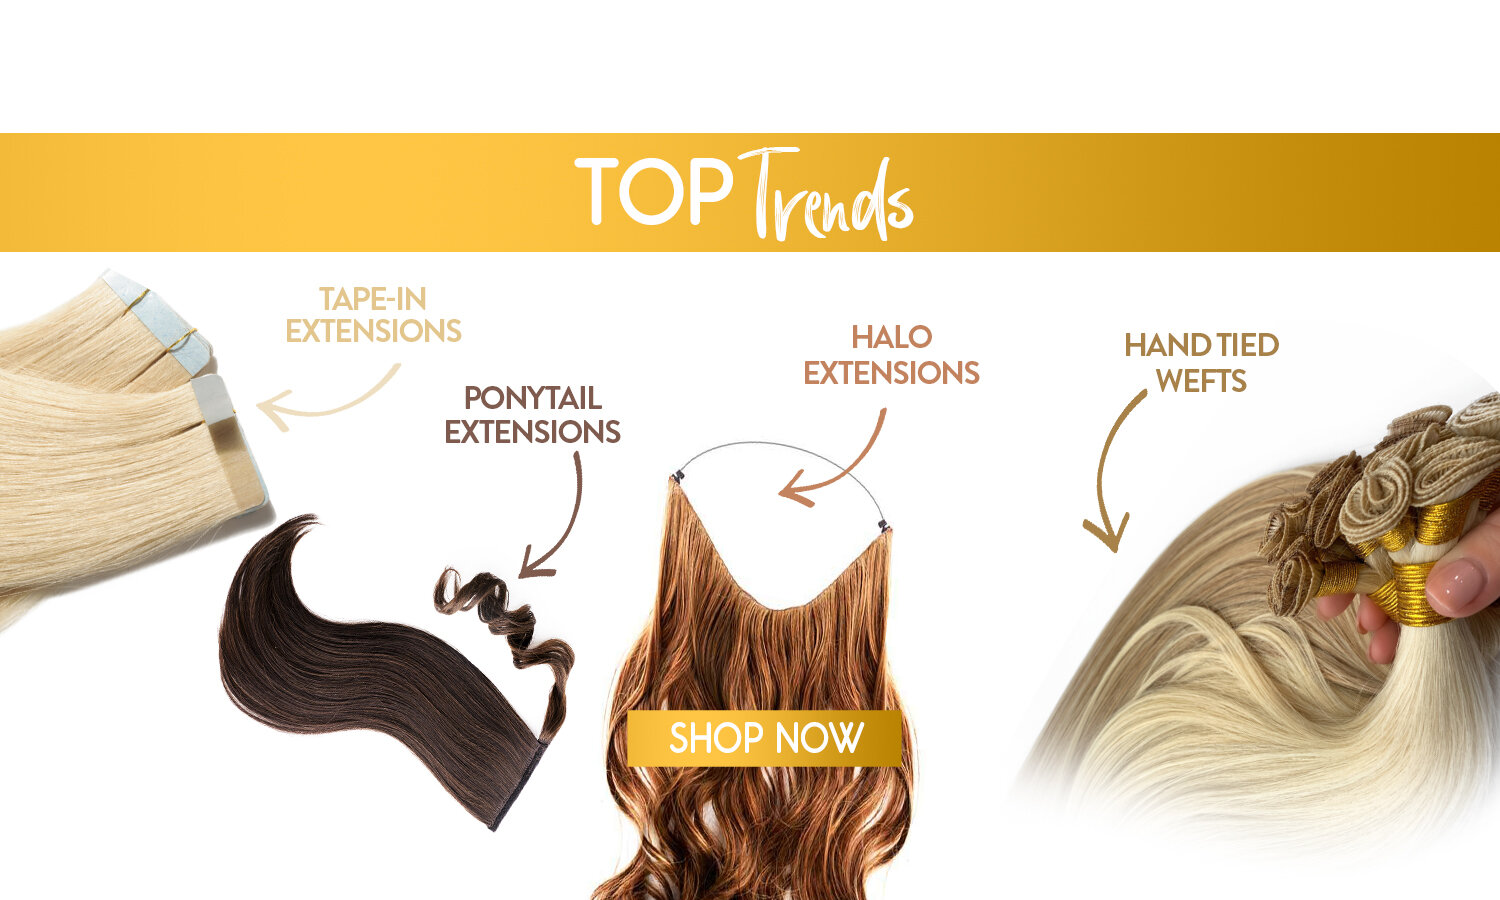 Best Hair Extensions NYC | Luxe Aura Hair Salon & Extensions New York